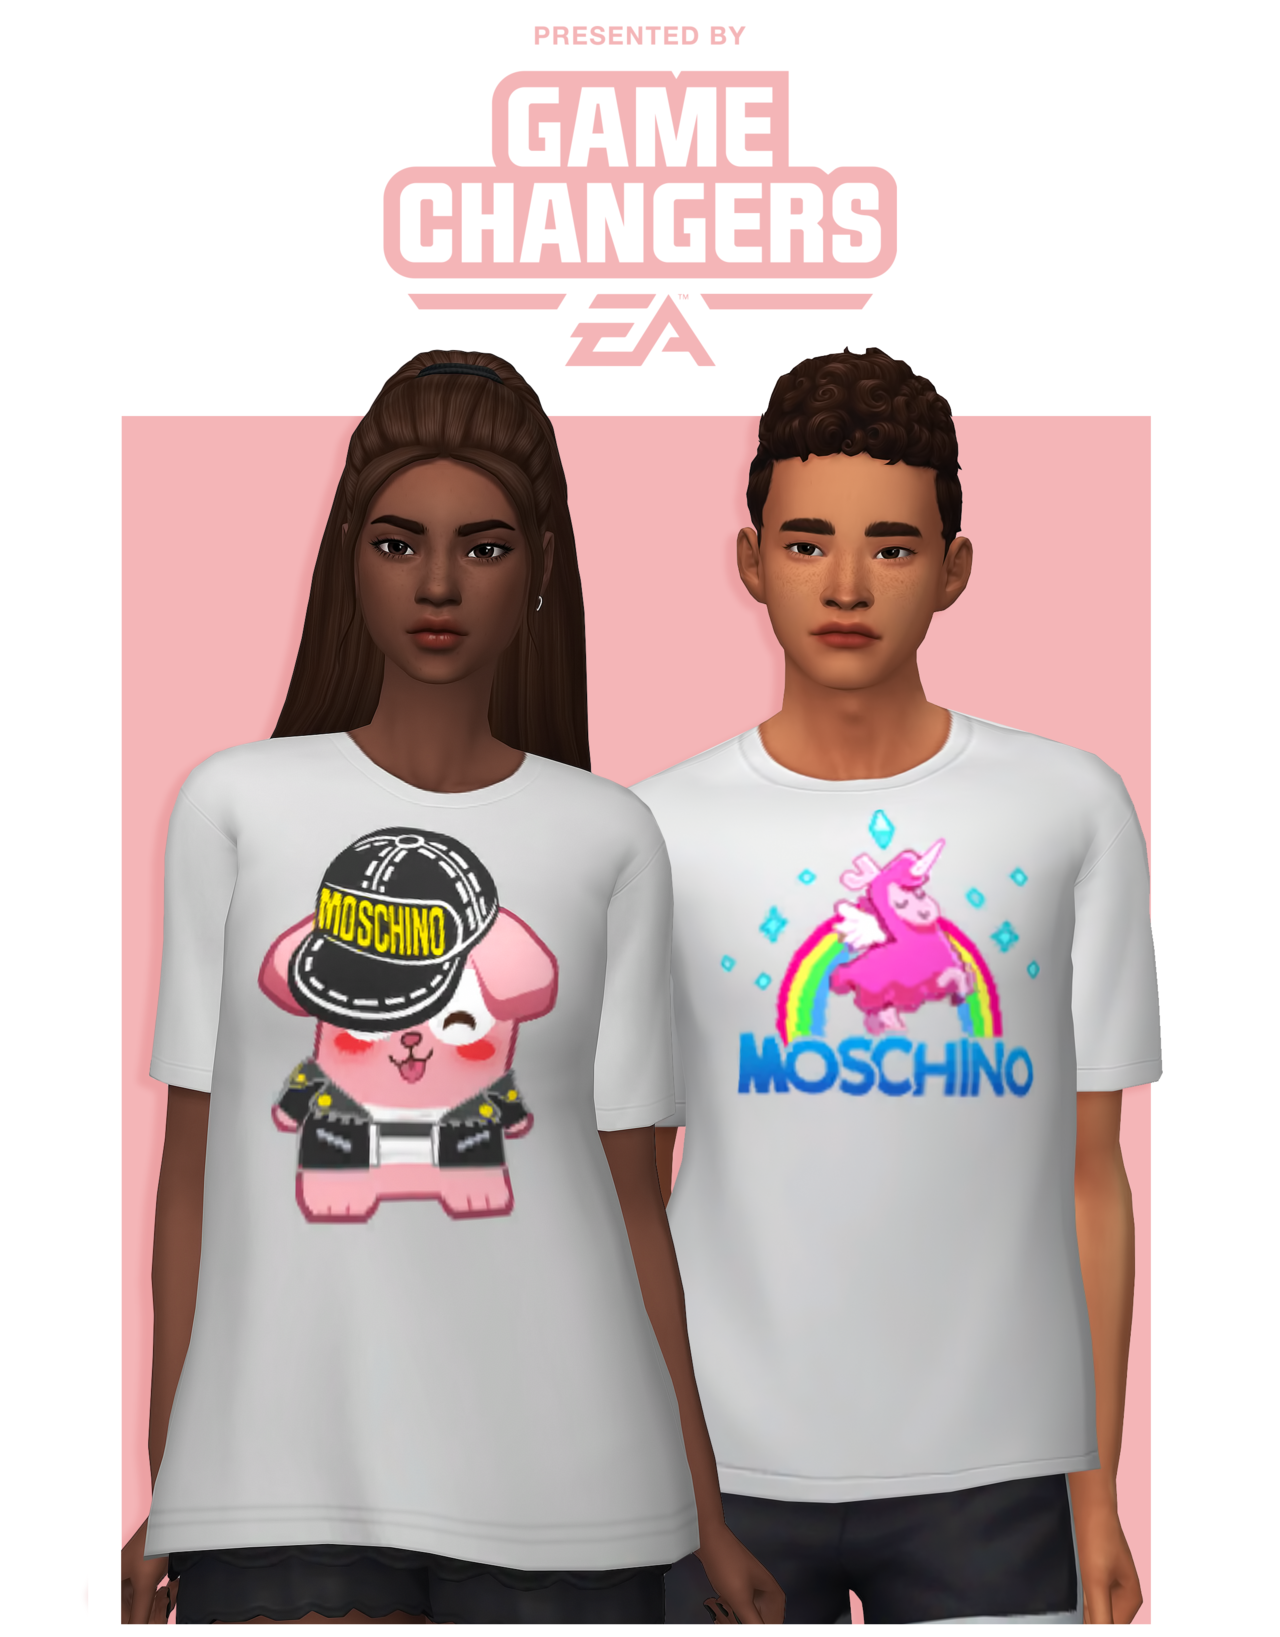 The Sims 4: Moschino Stuff Mini CAS Review This... : AHarris00Britney